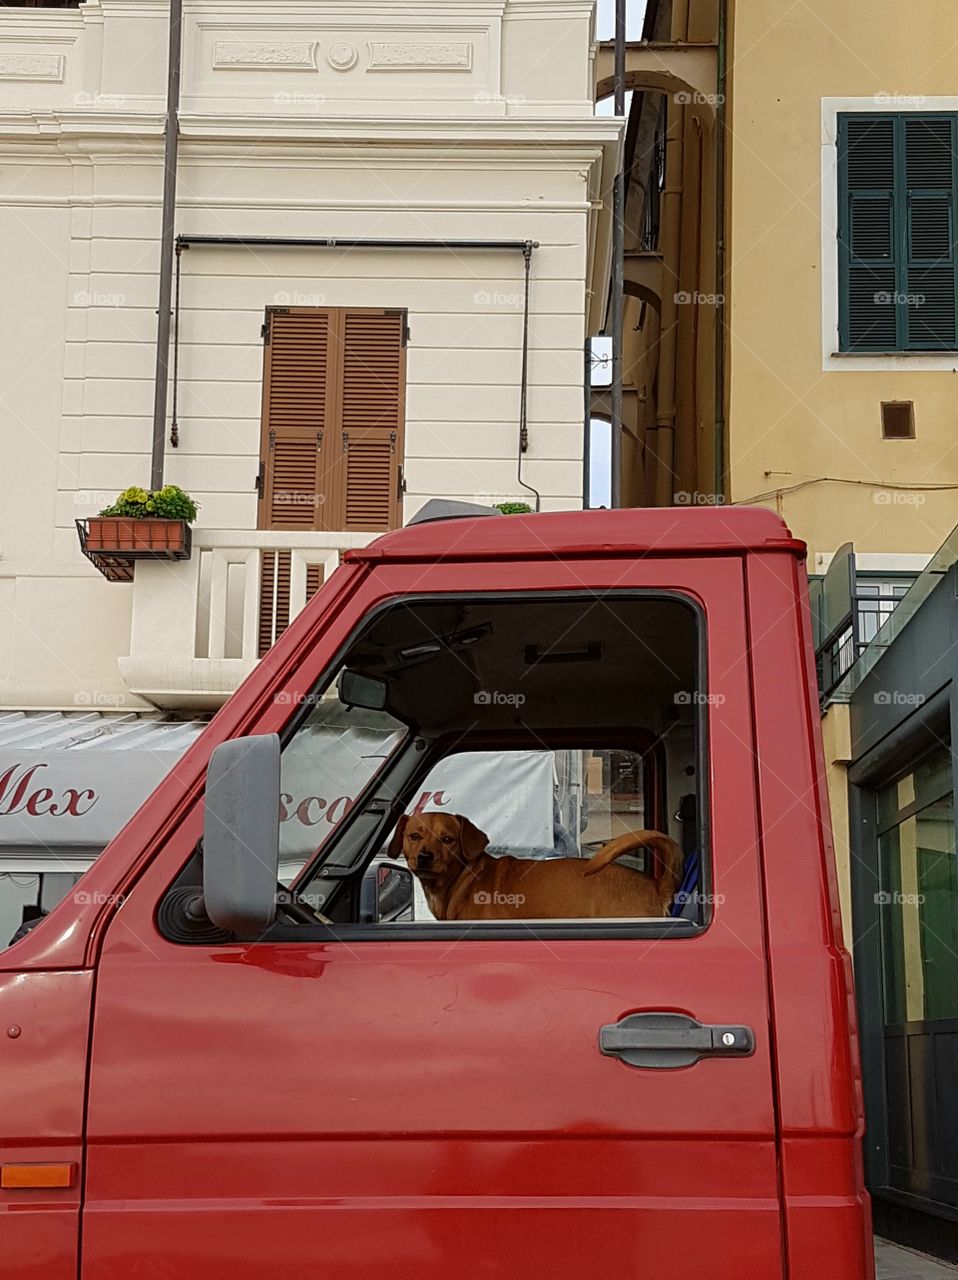 Dog waiting for his master in a van in the street